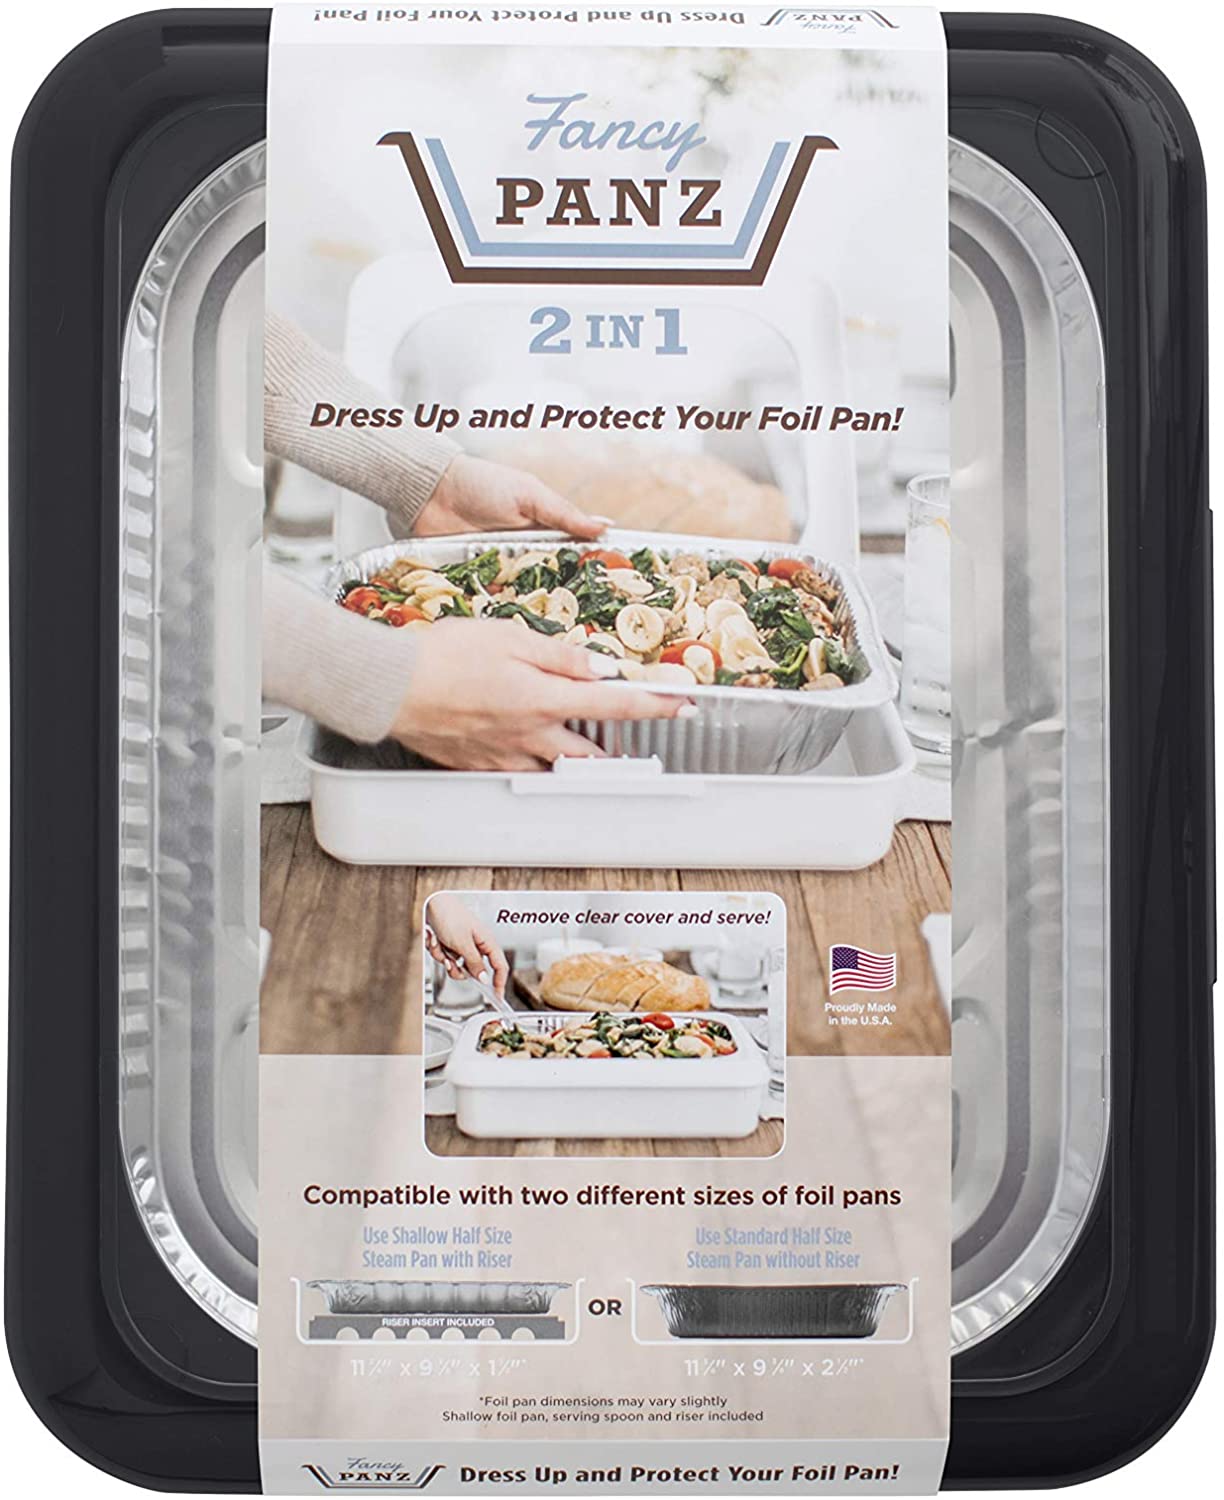 Fancy Panz for Foil Pans! Perfect for tailgating, potlucks, parties an, FANCY